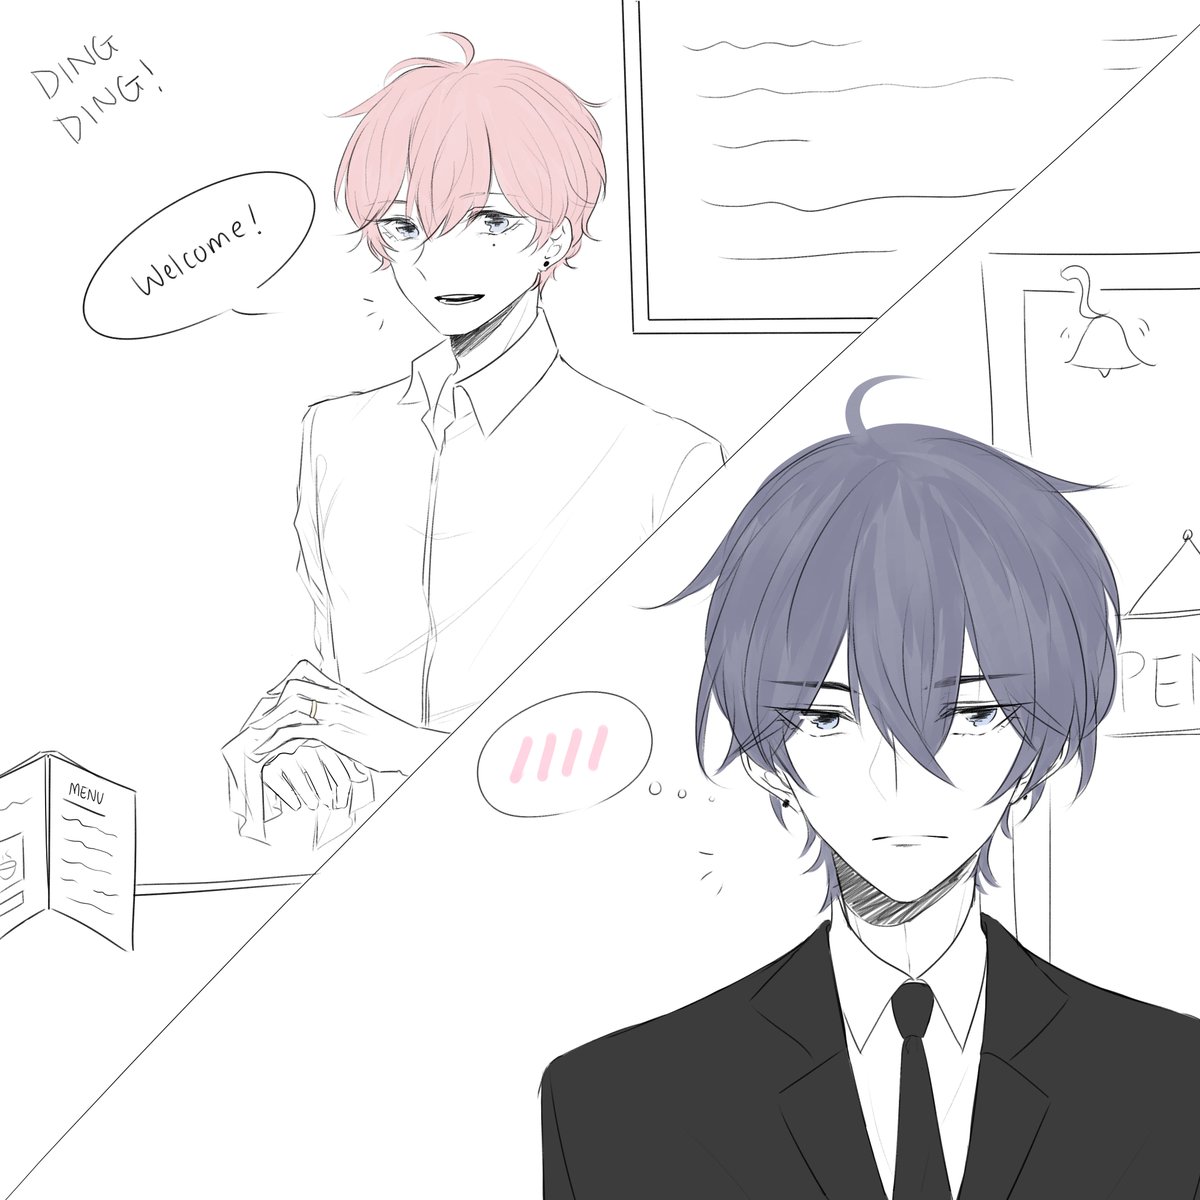 DAY 10 AND 11 COMBINED! Coffee shop au and future profession (Agent Kou LUL) I guess being a barista could be Rems future job ? 